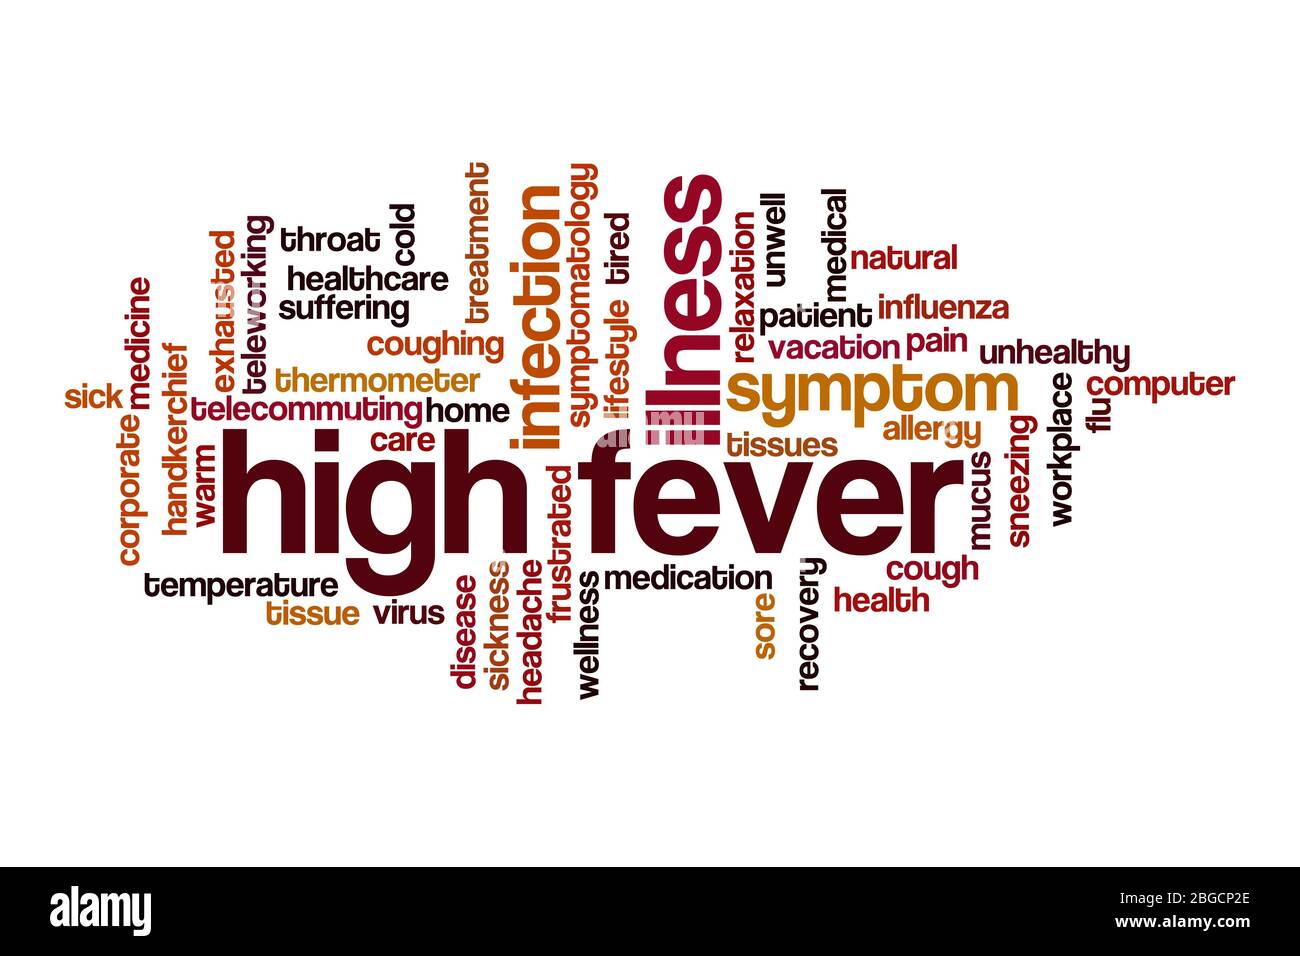 High fever word cloud concept on white background Stock Photo